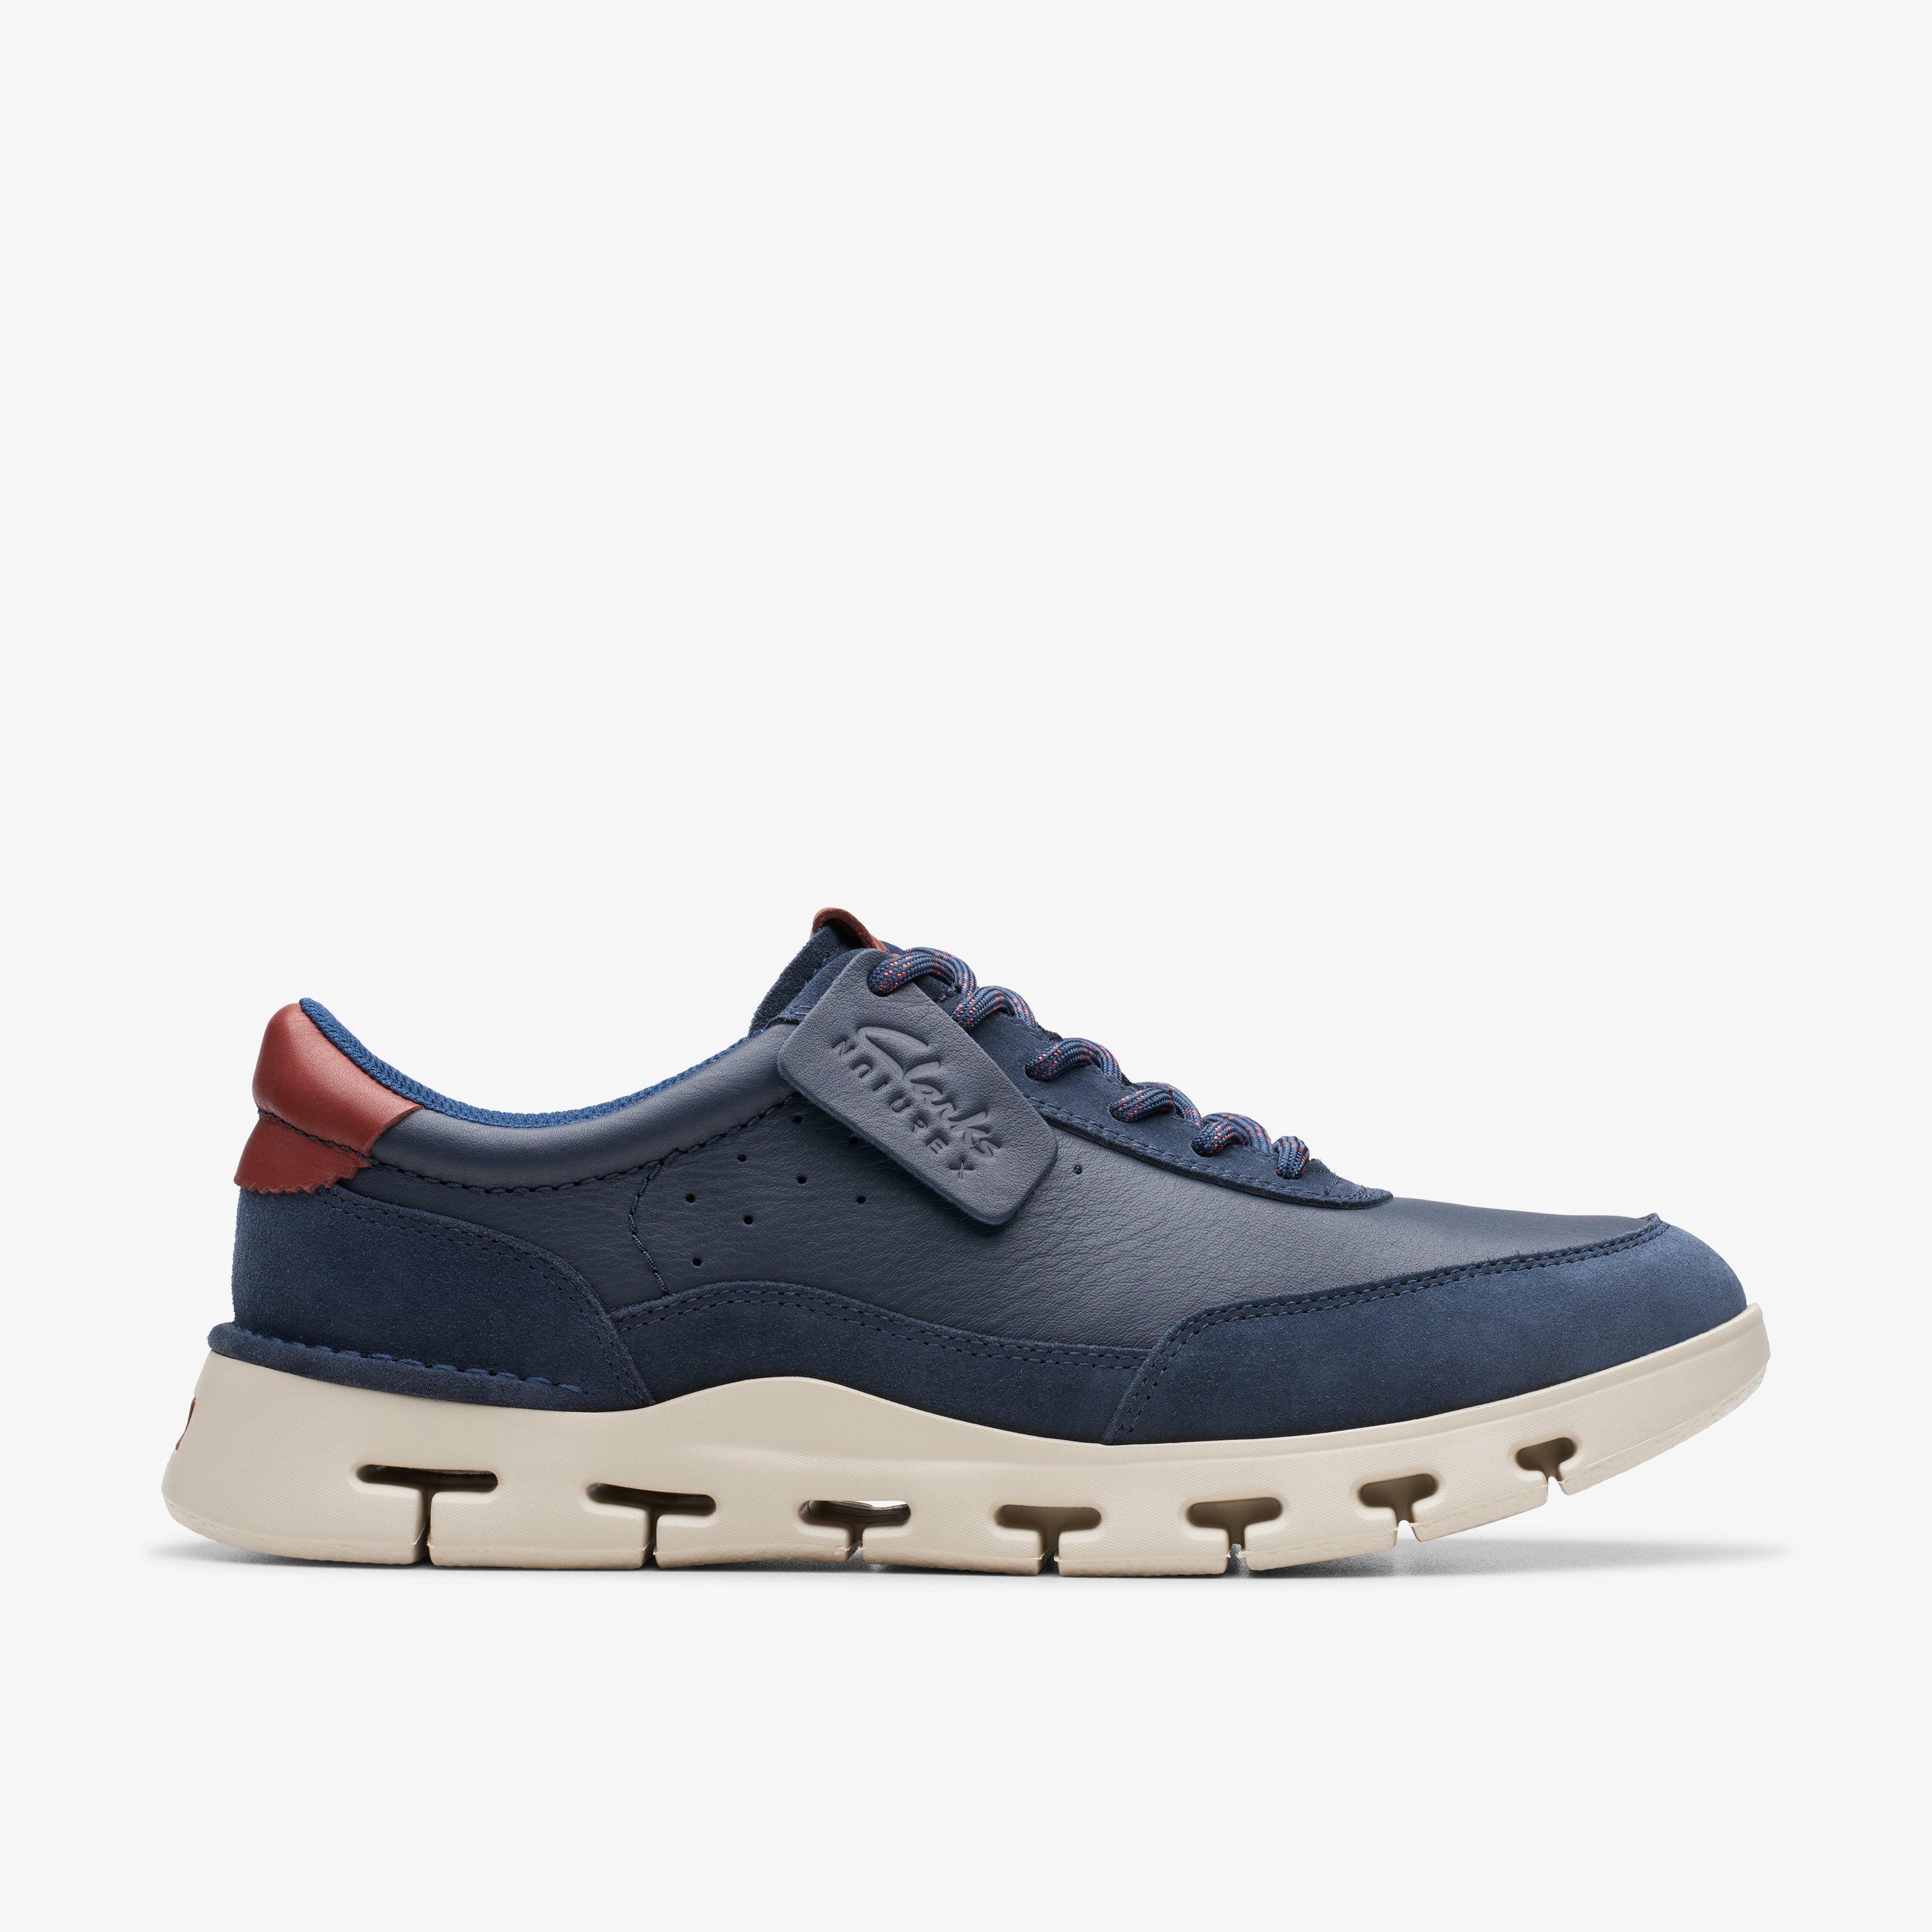 MENS Nature X One Navy Leather Sneakers | Clarks US